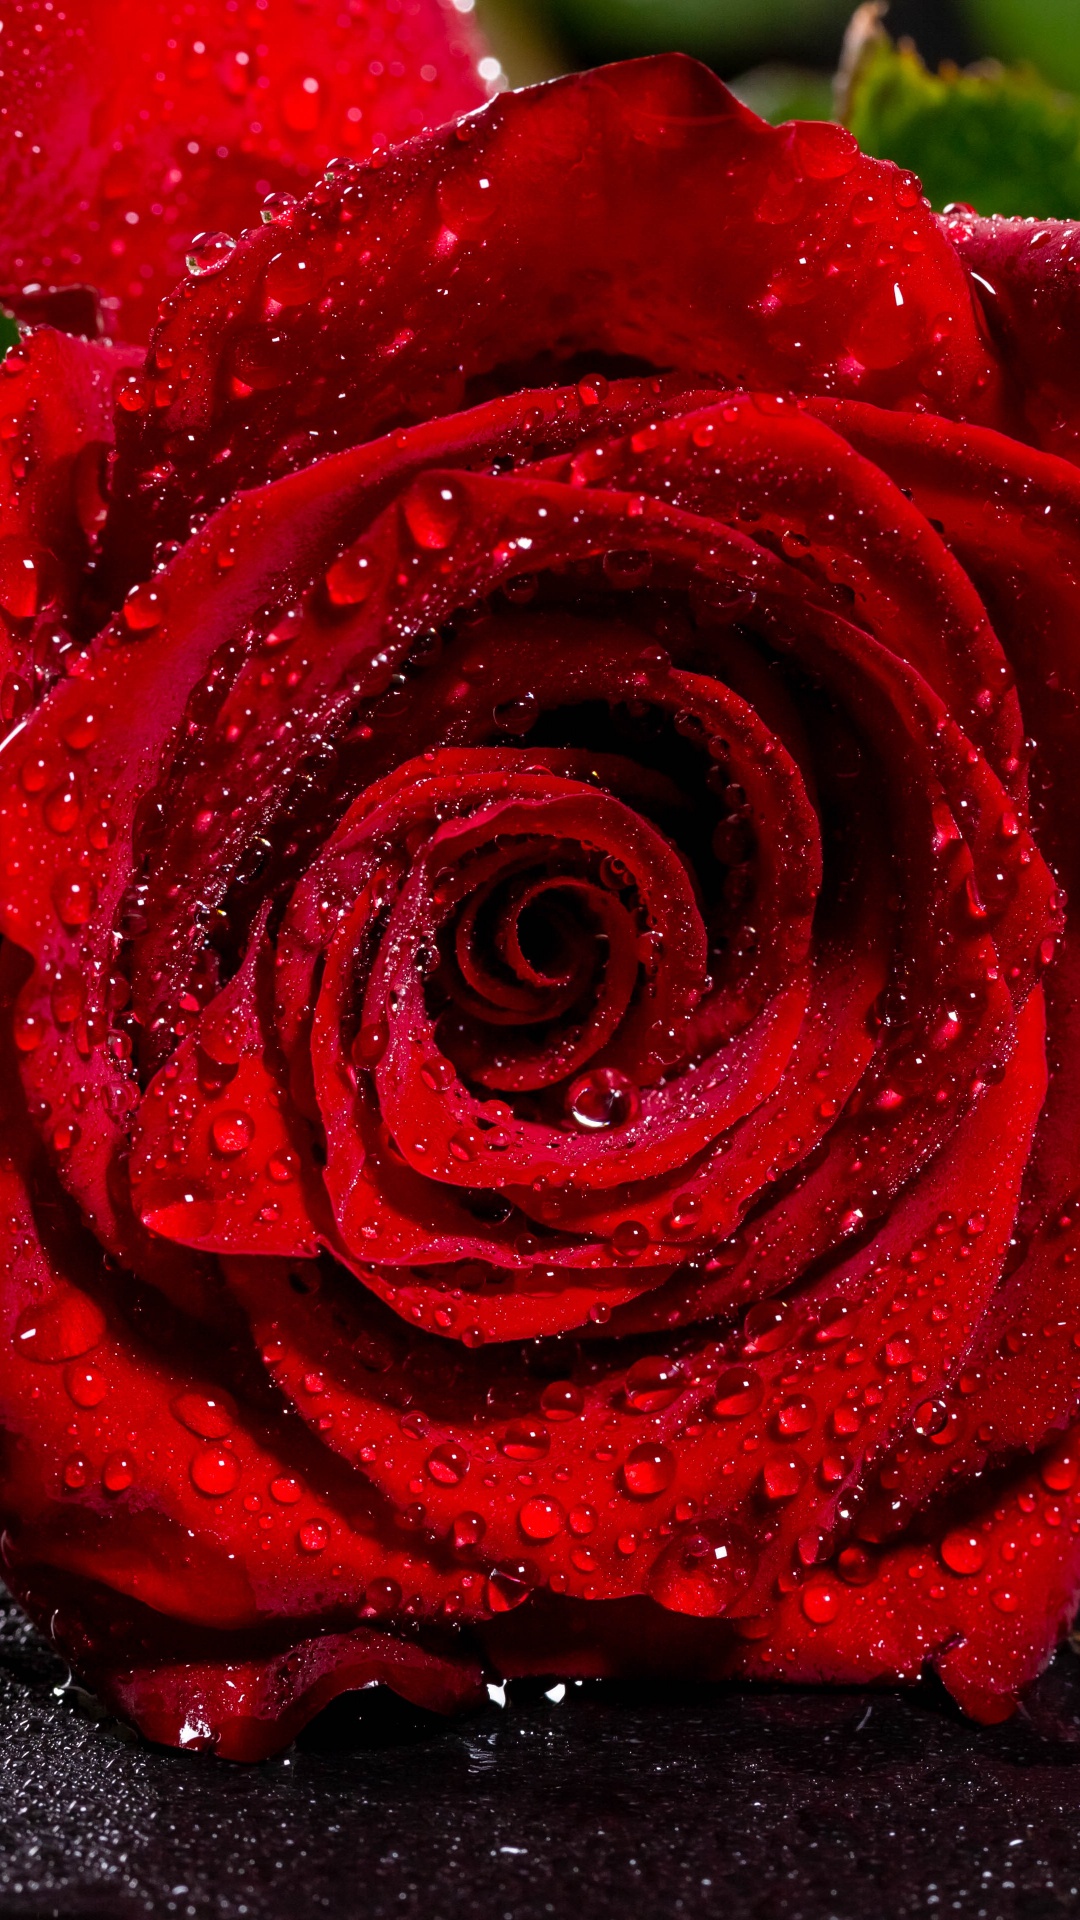 Red Rose on Black Surface. Wallpaper in 1080x1920 Resolution